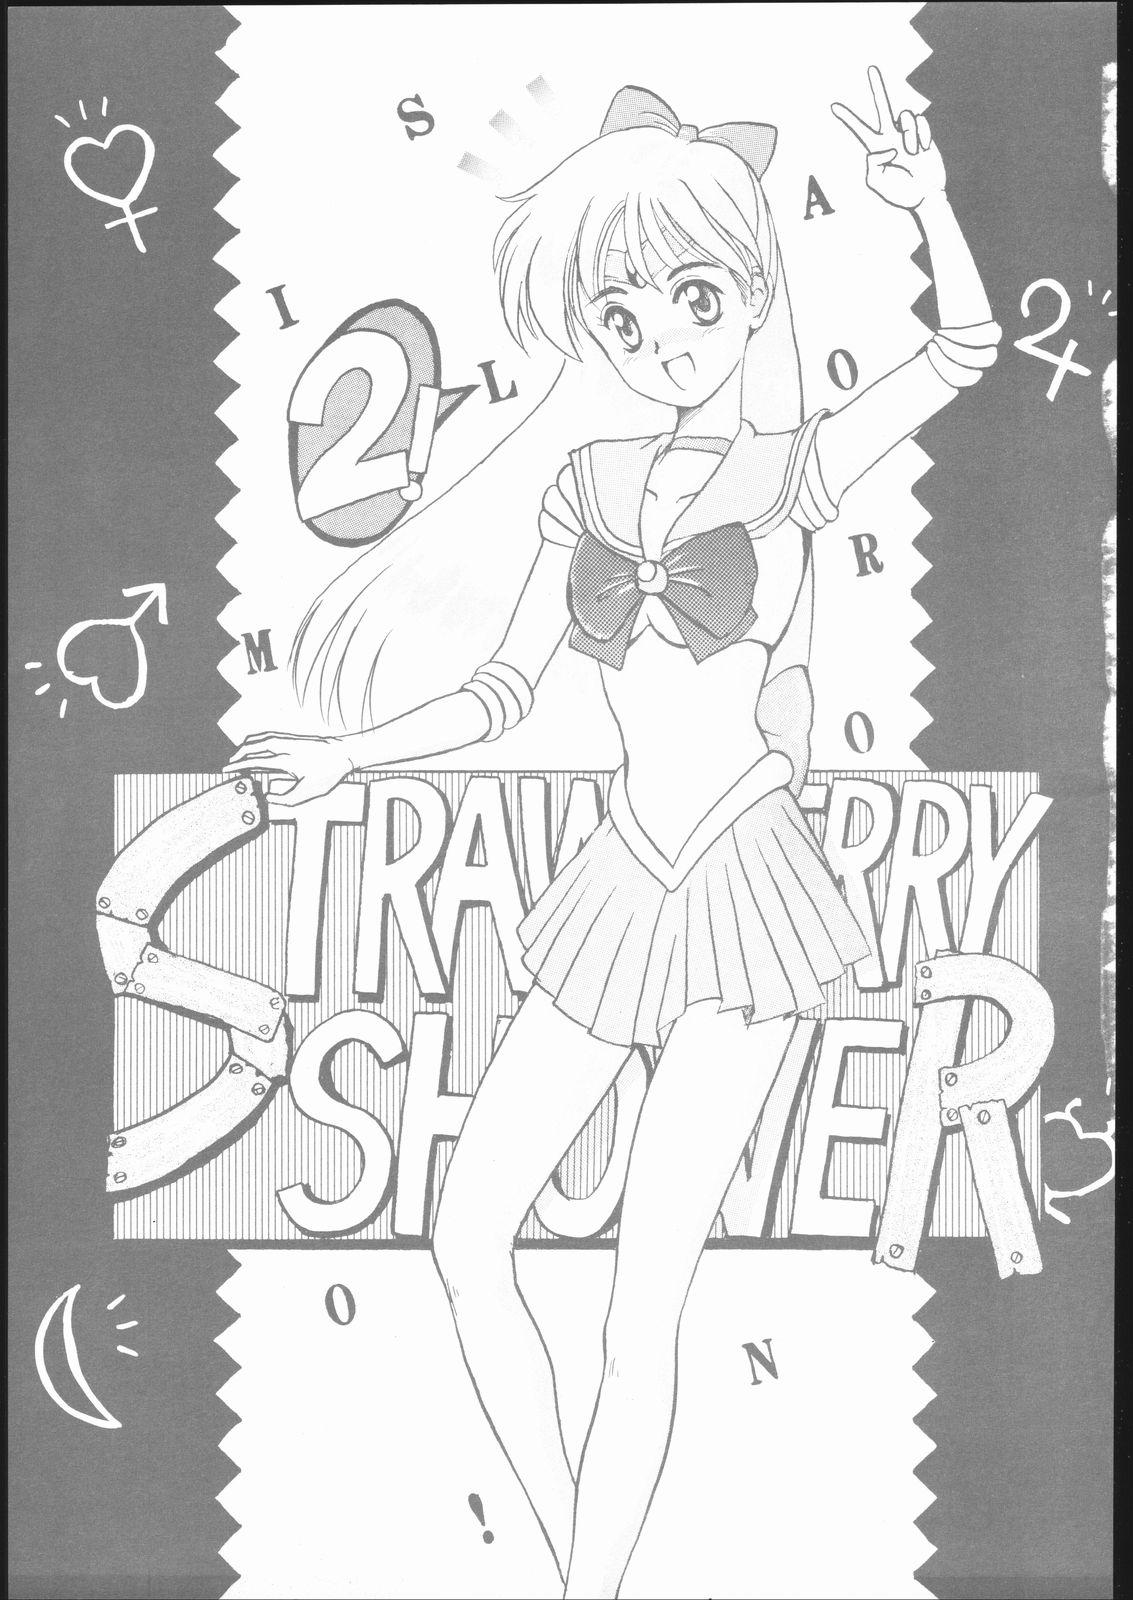 Woman Strawberry Shower 2 - Sailor moon World heroes Wife - Page 2